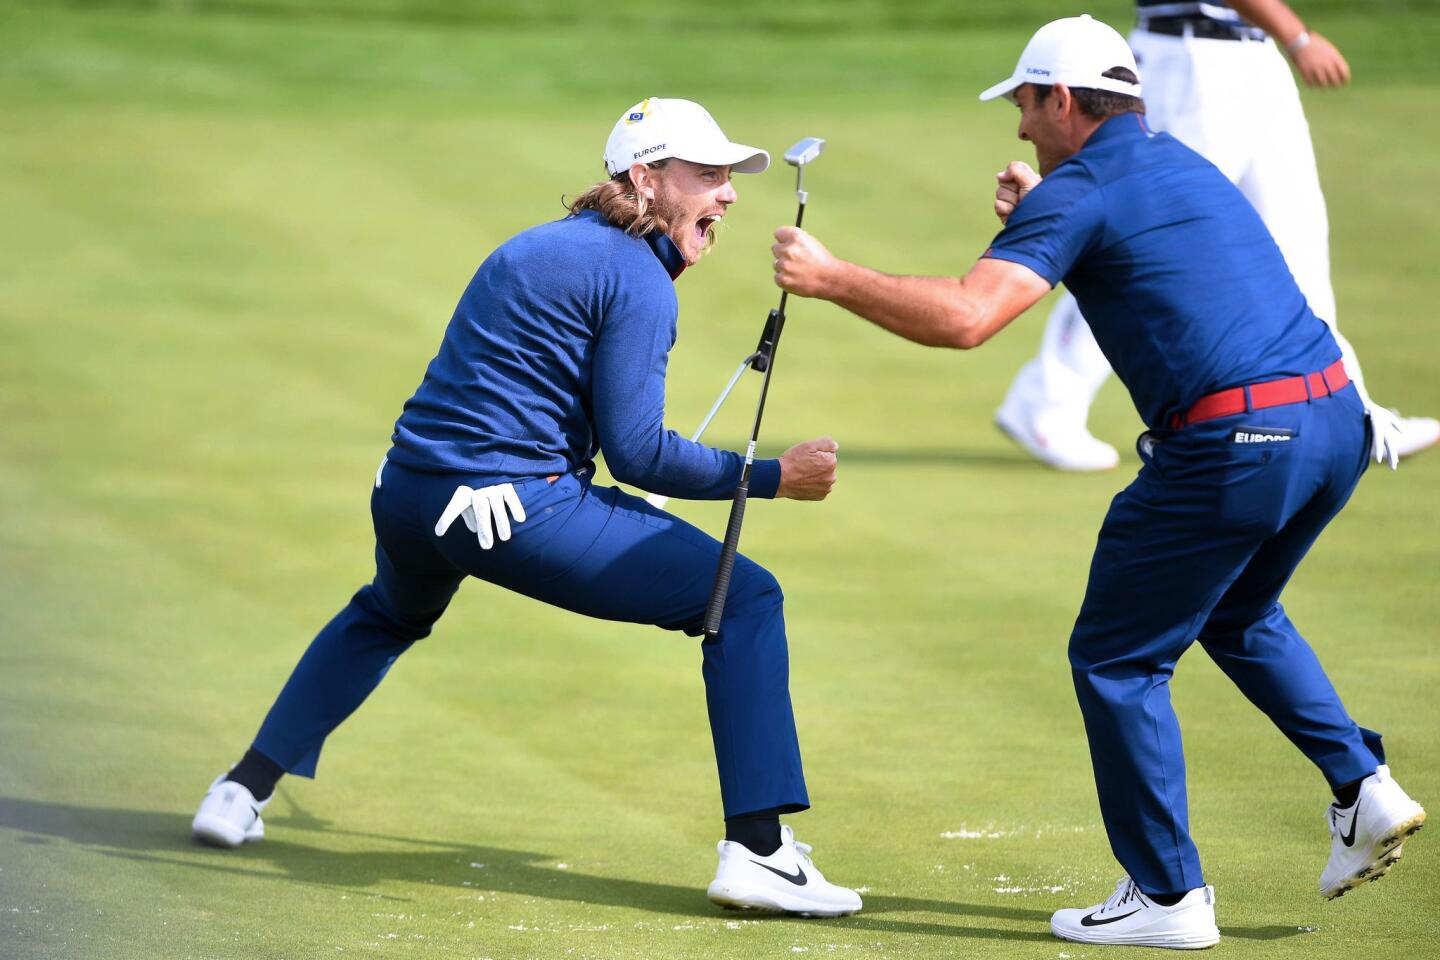 42nd Ryder Cup in France